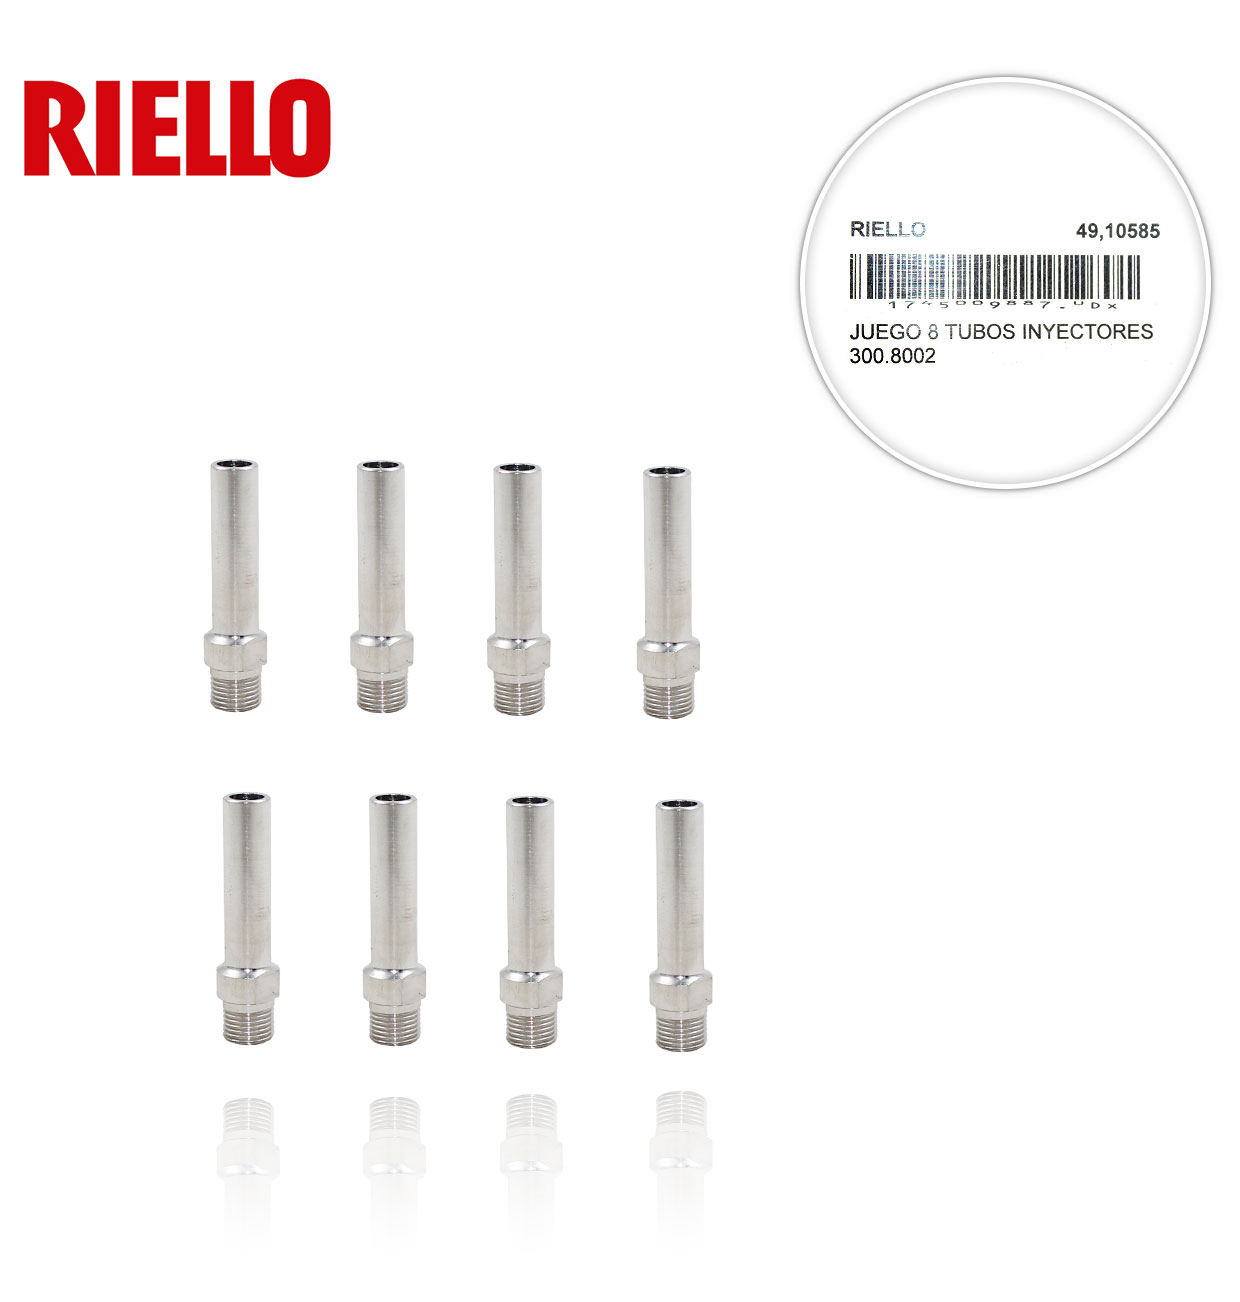 RIELLO 3008002 SET OF INJECTOR TUBES (8 units)